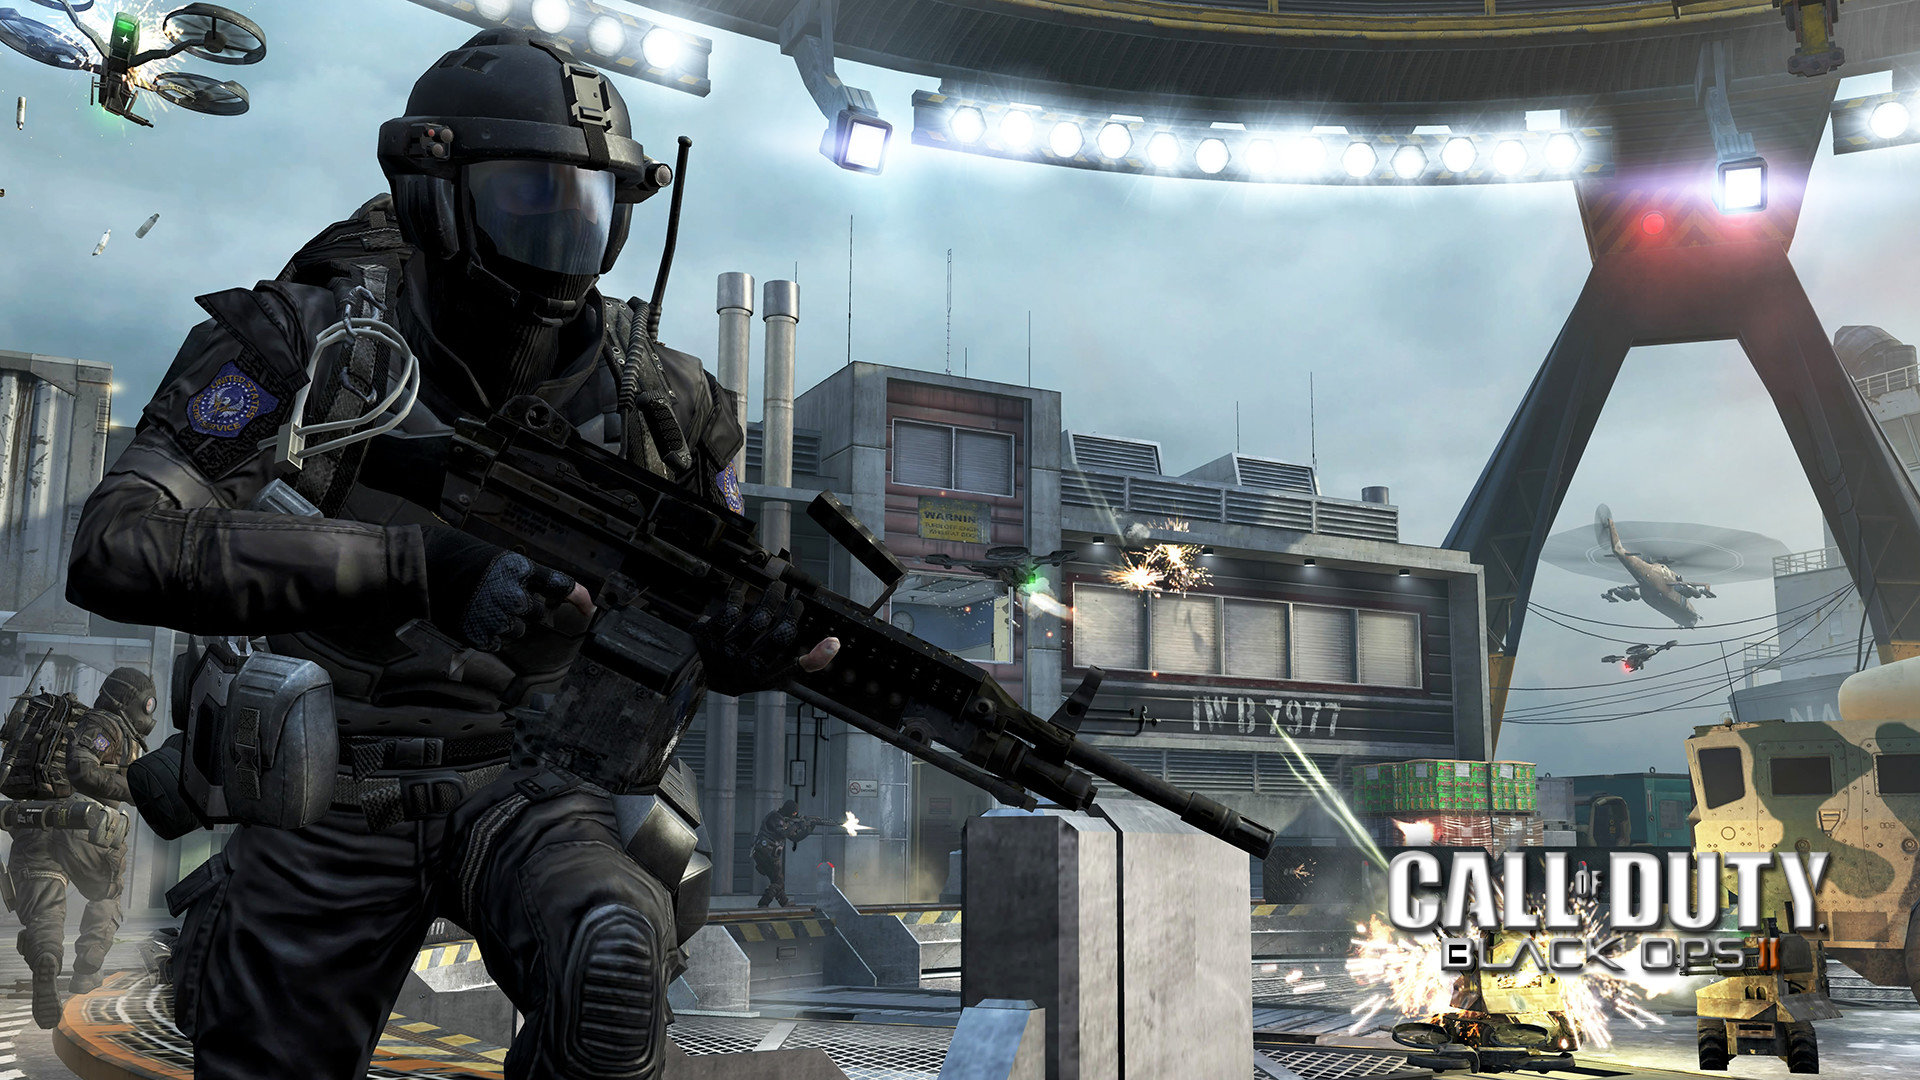 Download full hd 1920x1080 Call Of Duty: Black Ops 2 PC background ID:187689 for free